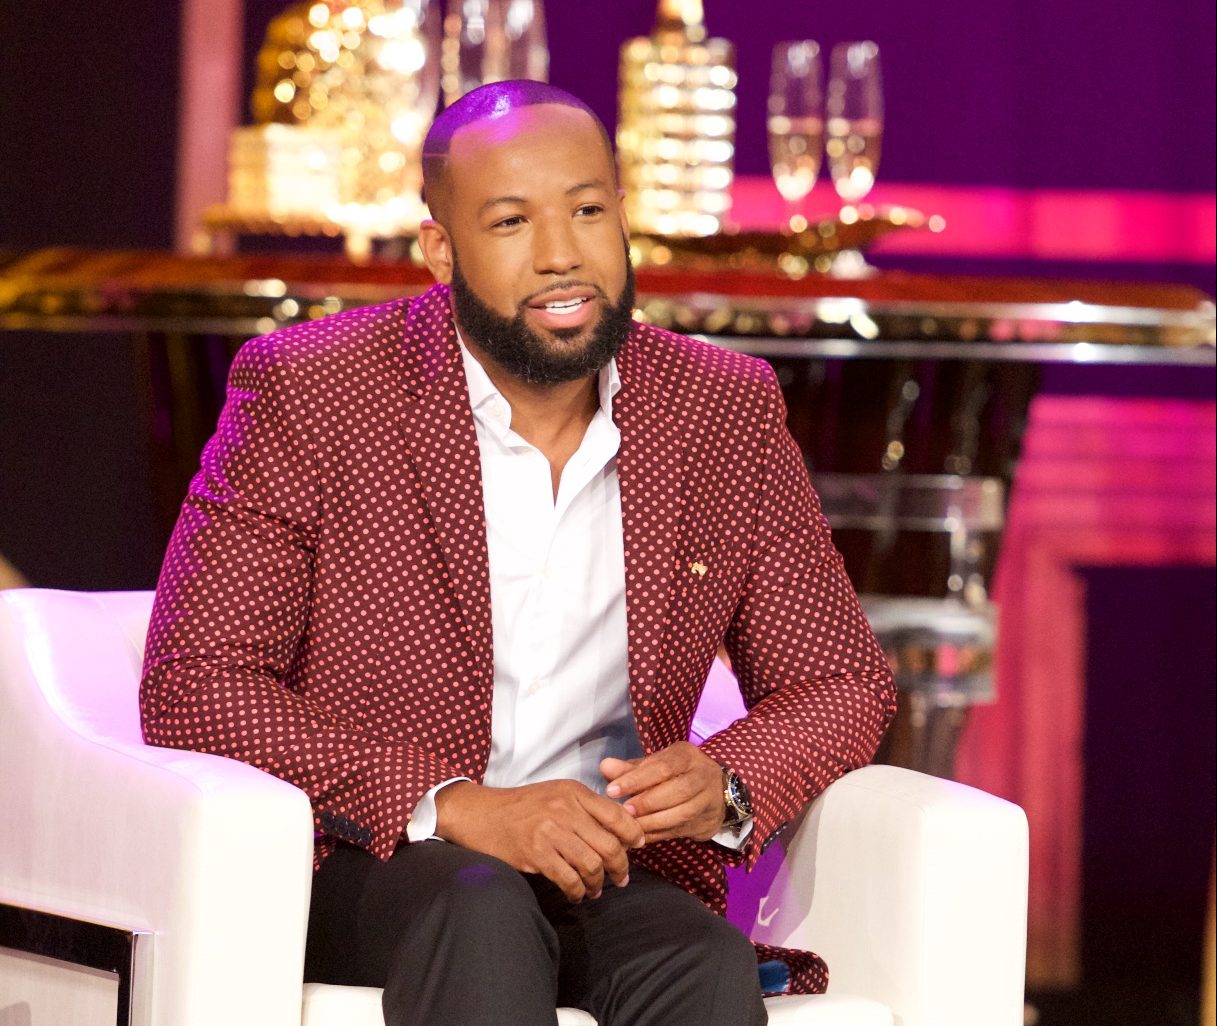 Reality television creator and producer Carlos King steps into The Shade Room to talk about his latest projects, past projects and more.